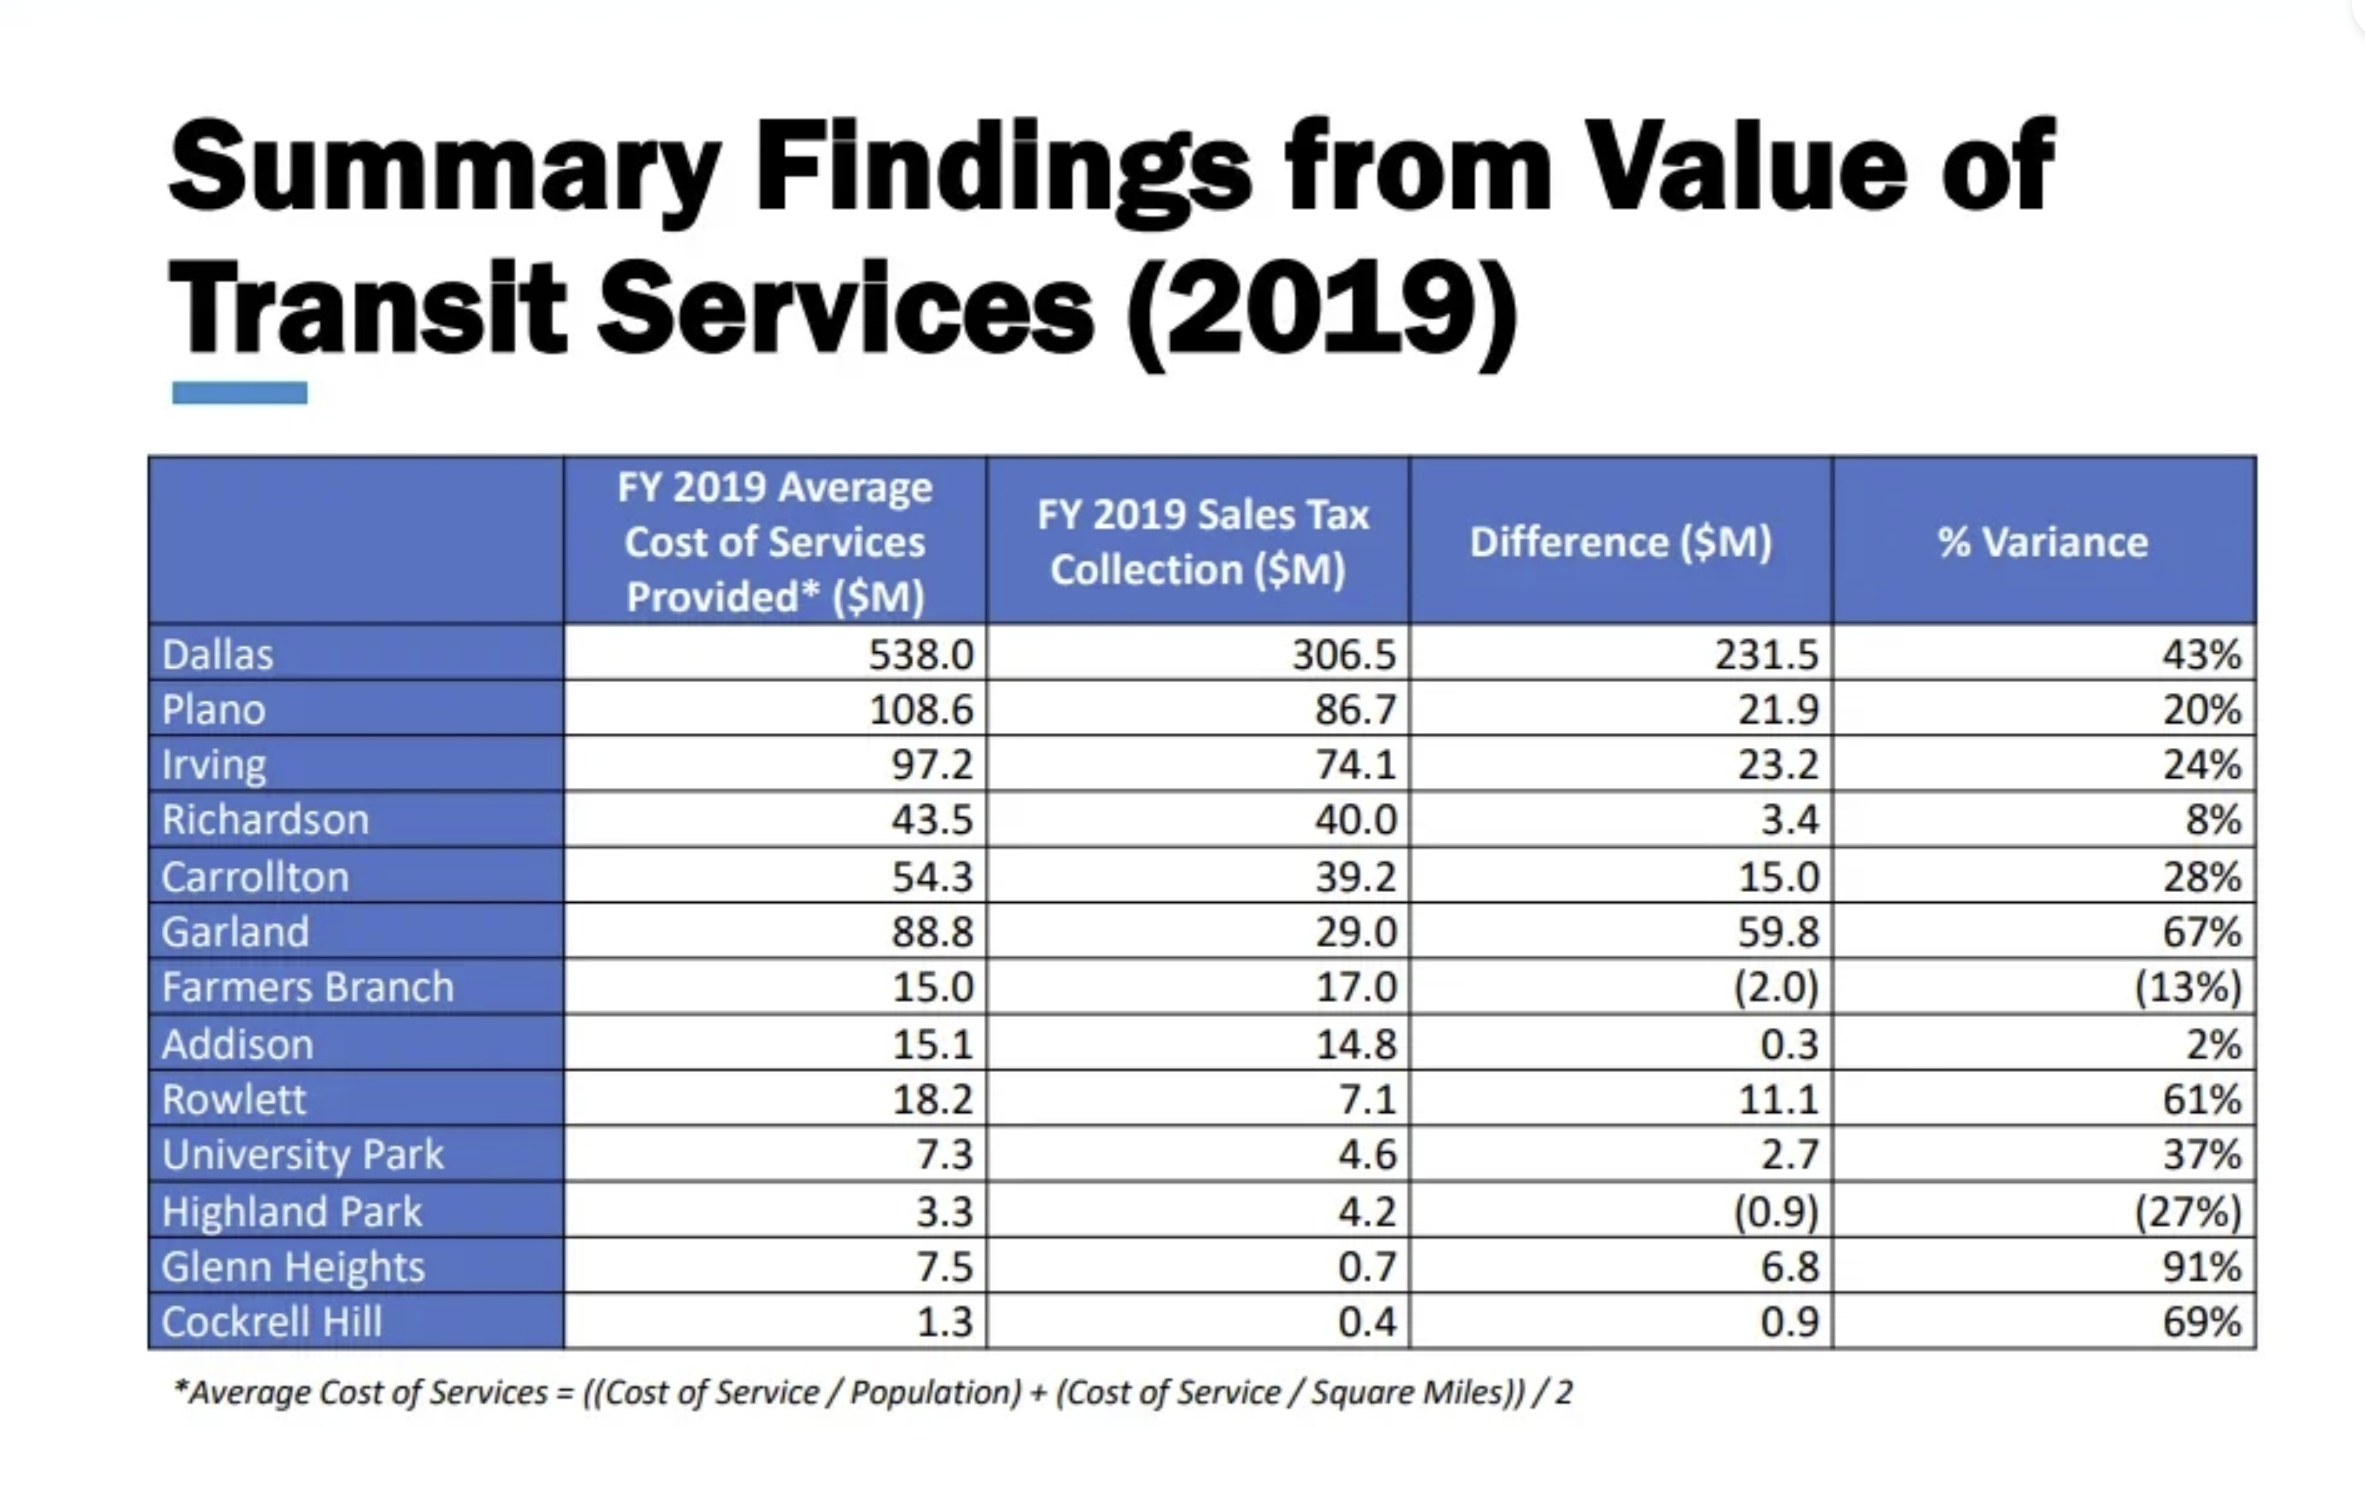 Table of summary findings from Value of Transit Services (2019)